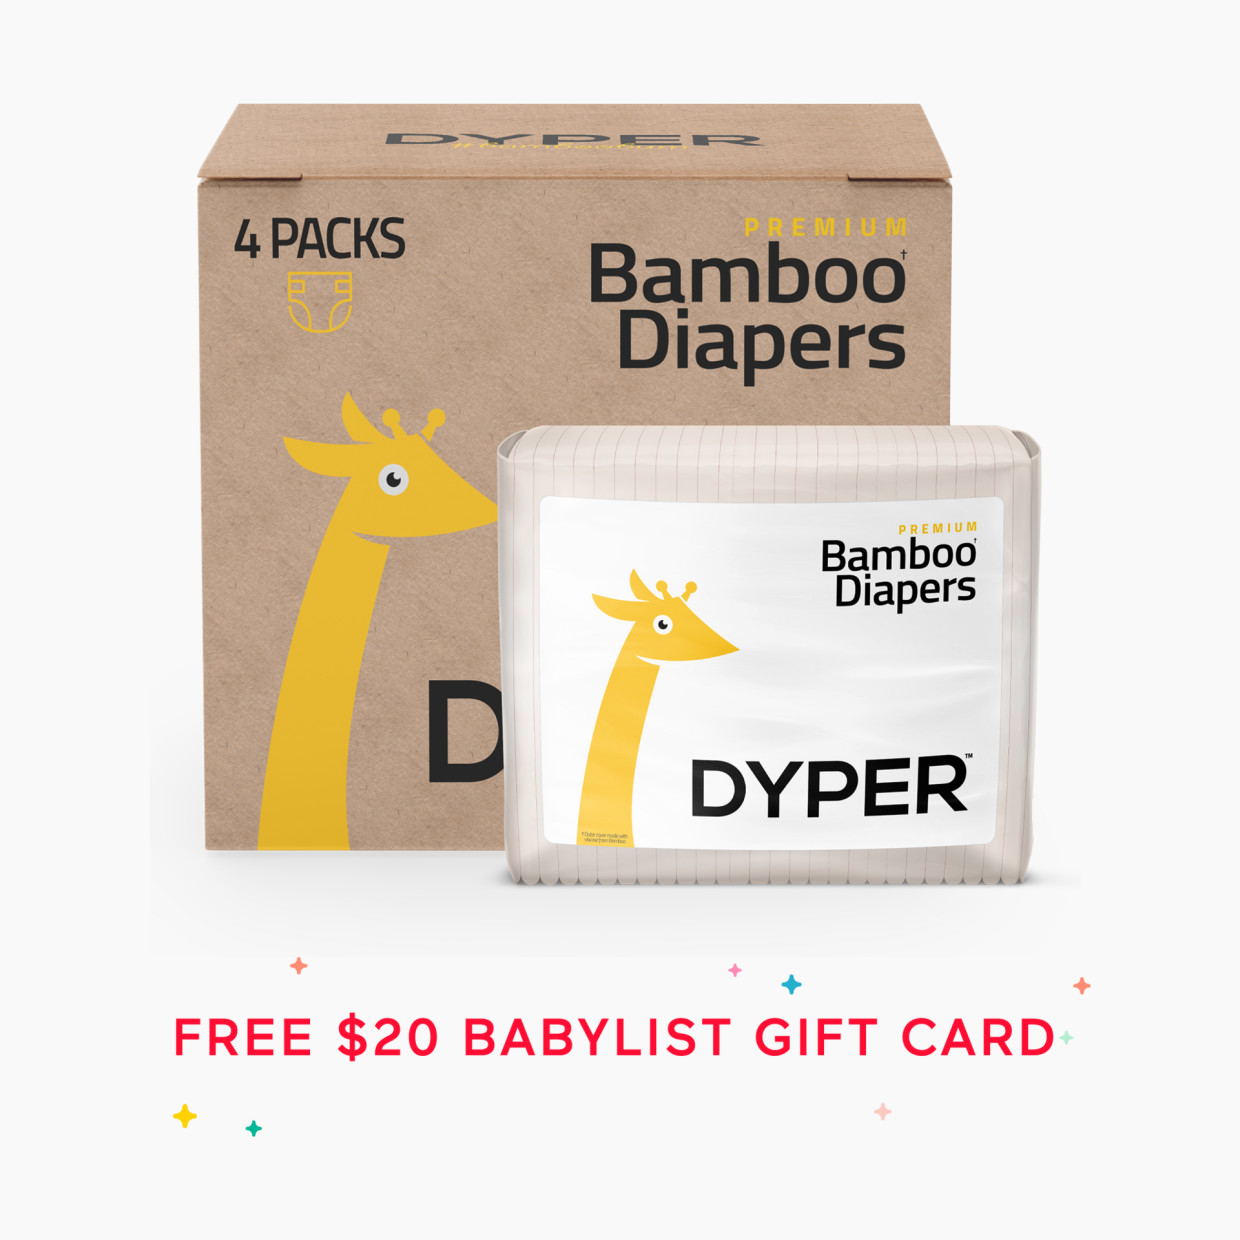 DYPER Bamboo Baby Diapers, Monthly Supply + Free Babylist Gift Card, Cyber Monday Deal - Newborn, 264 Count, 1.